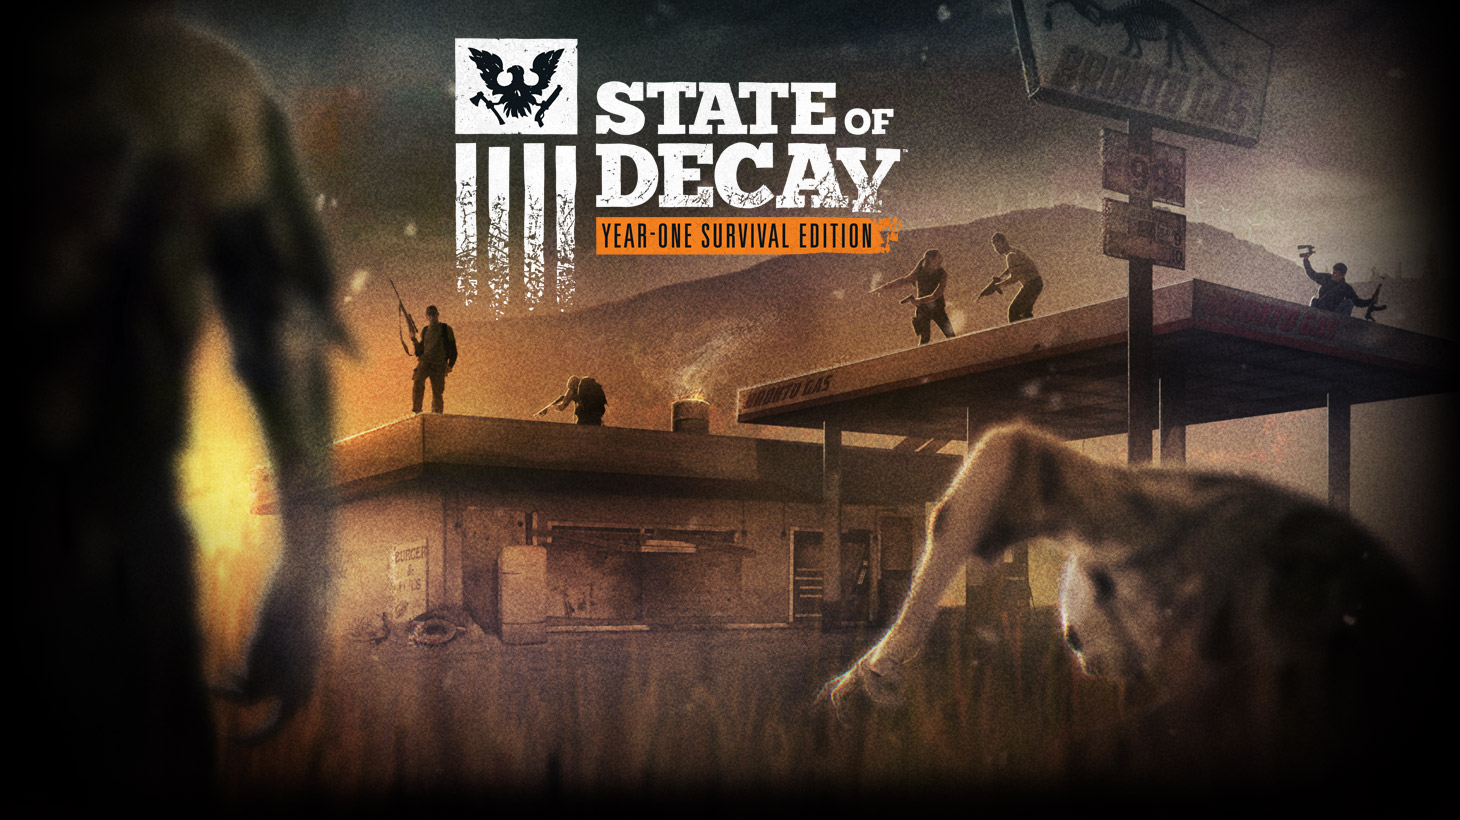 state of decay year one survival edition black screen after changing resolution